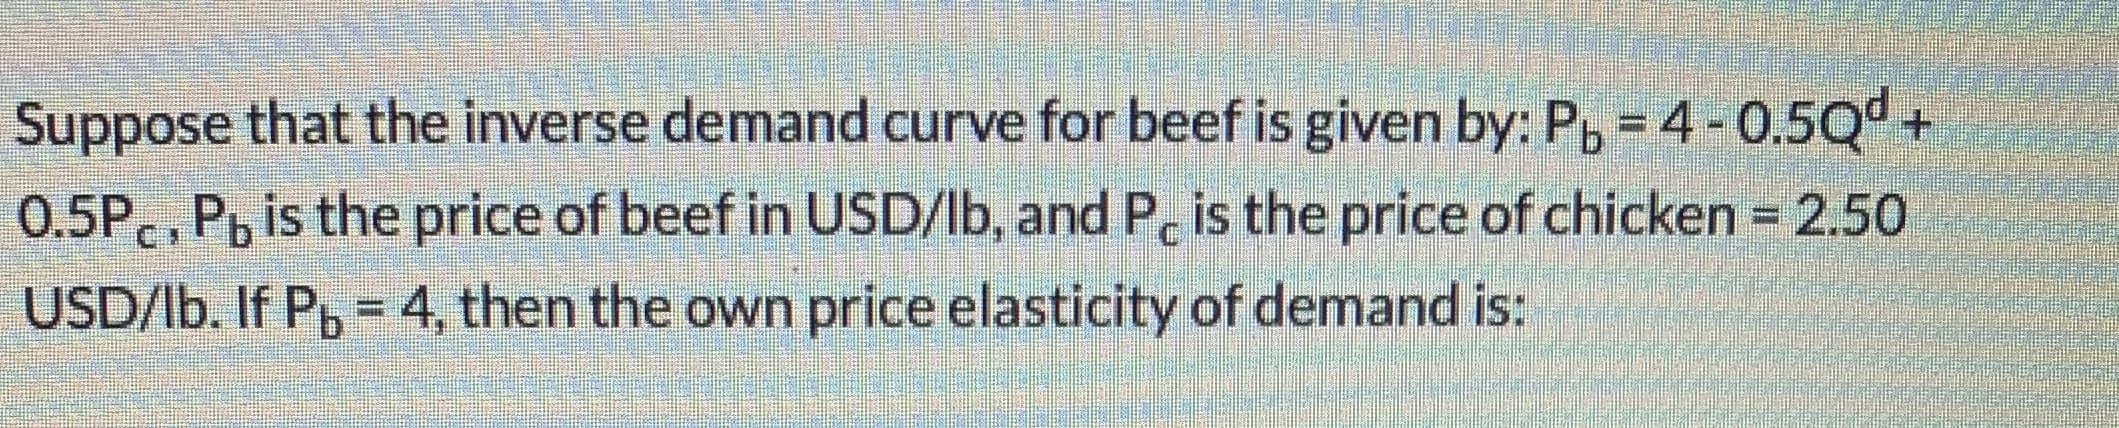 Suppose that the inverse demand curve for beef is given by: P, = 4-0.5Q+
0.5P., P, is the price of beef in USD/lb, and P, is the price of chicken = 2.50
USD/lb. If P, = 4, then the own price elasticity of demand is:
